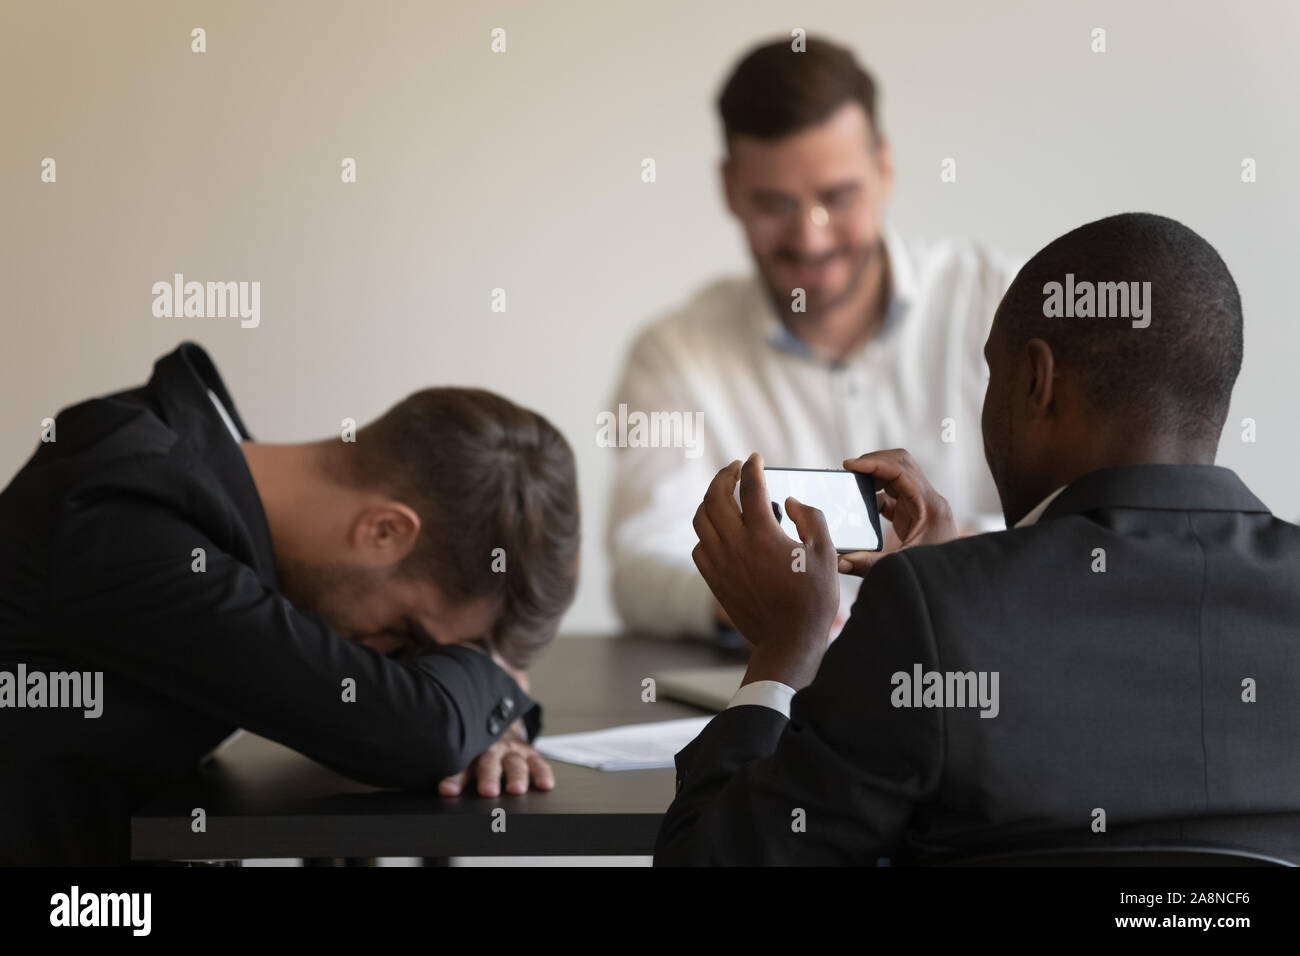 Employees take pictures of sleeping coworker at team meeting Stock Photo